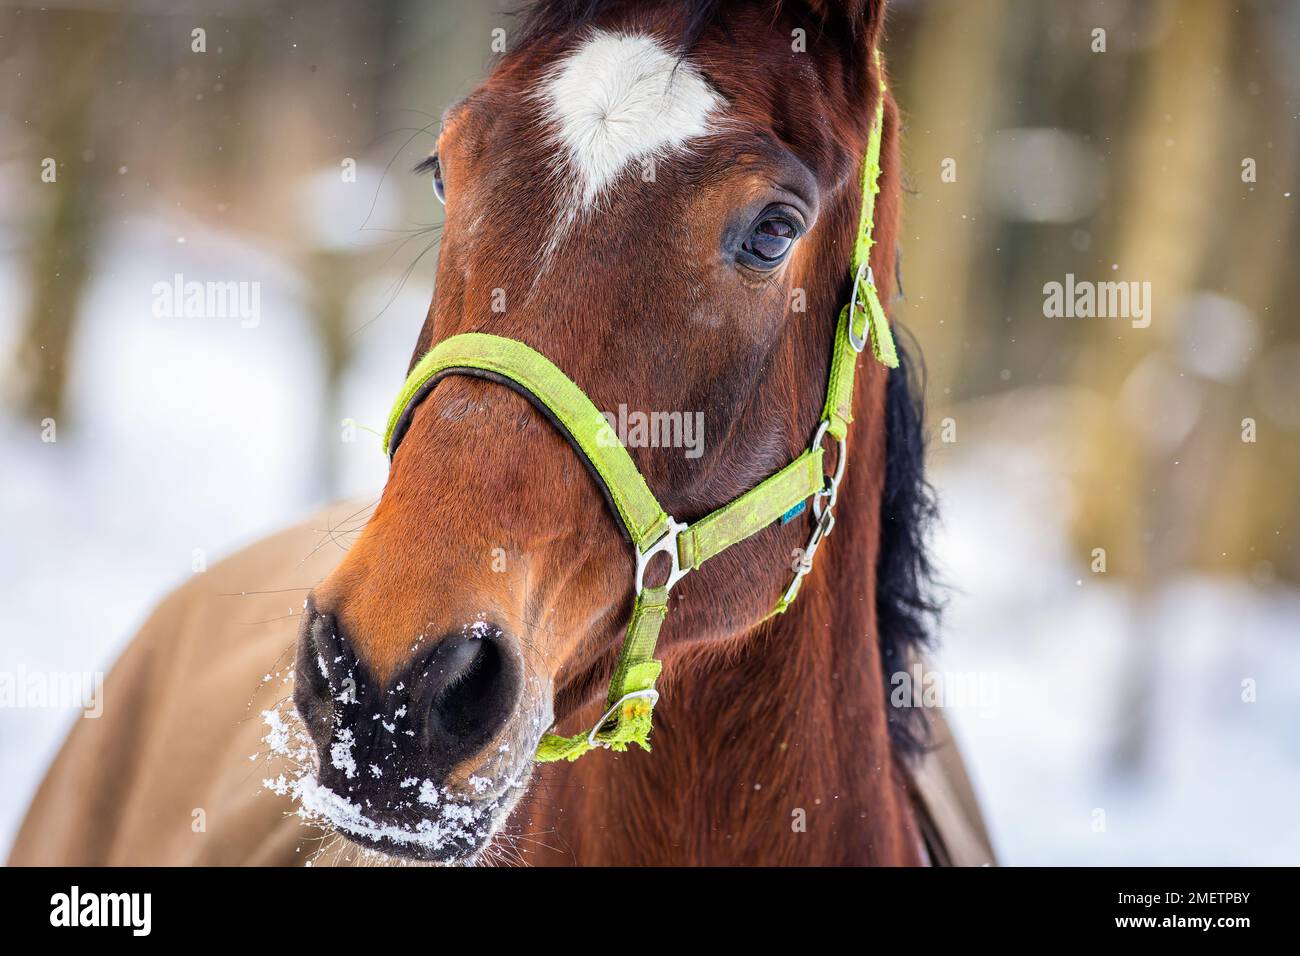 Close up image of a brown horse head with white spot on the forehead and green halter standing in a paddock on a winter day. White snow and trees Stock Photo